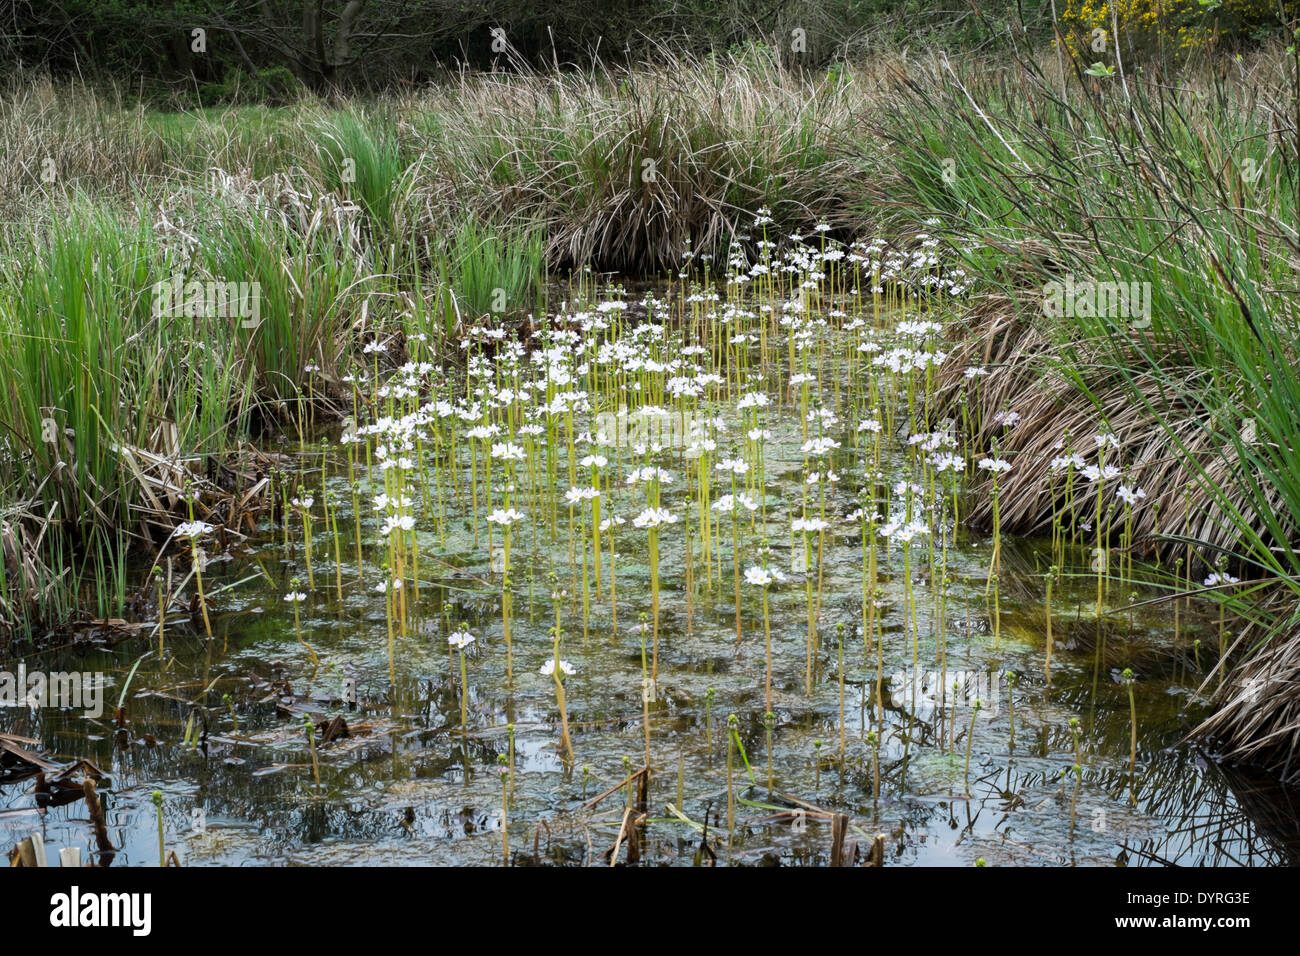 Pingo containing water plants and sedges. Stock Photo